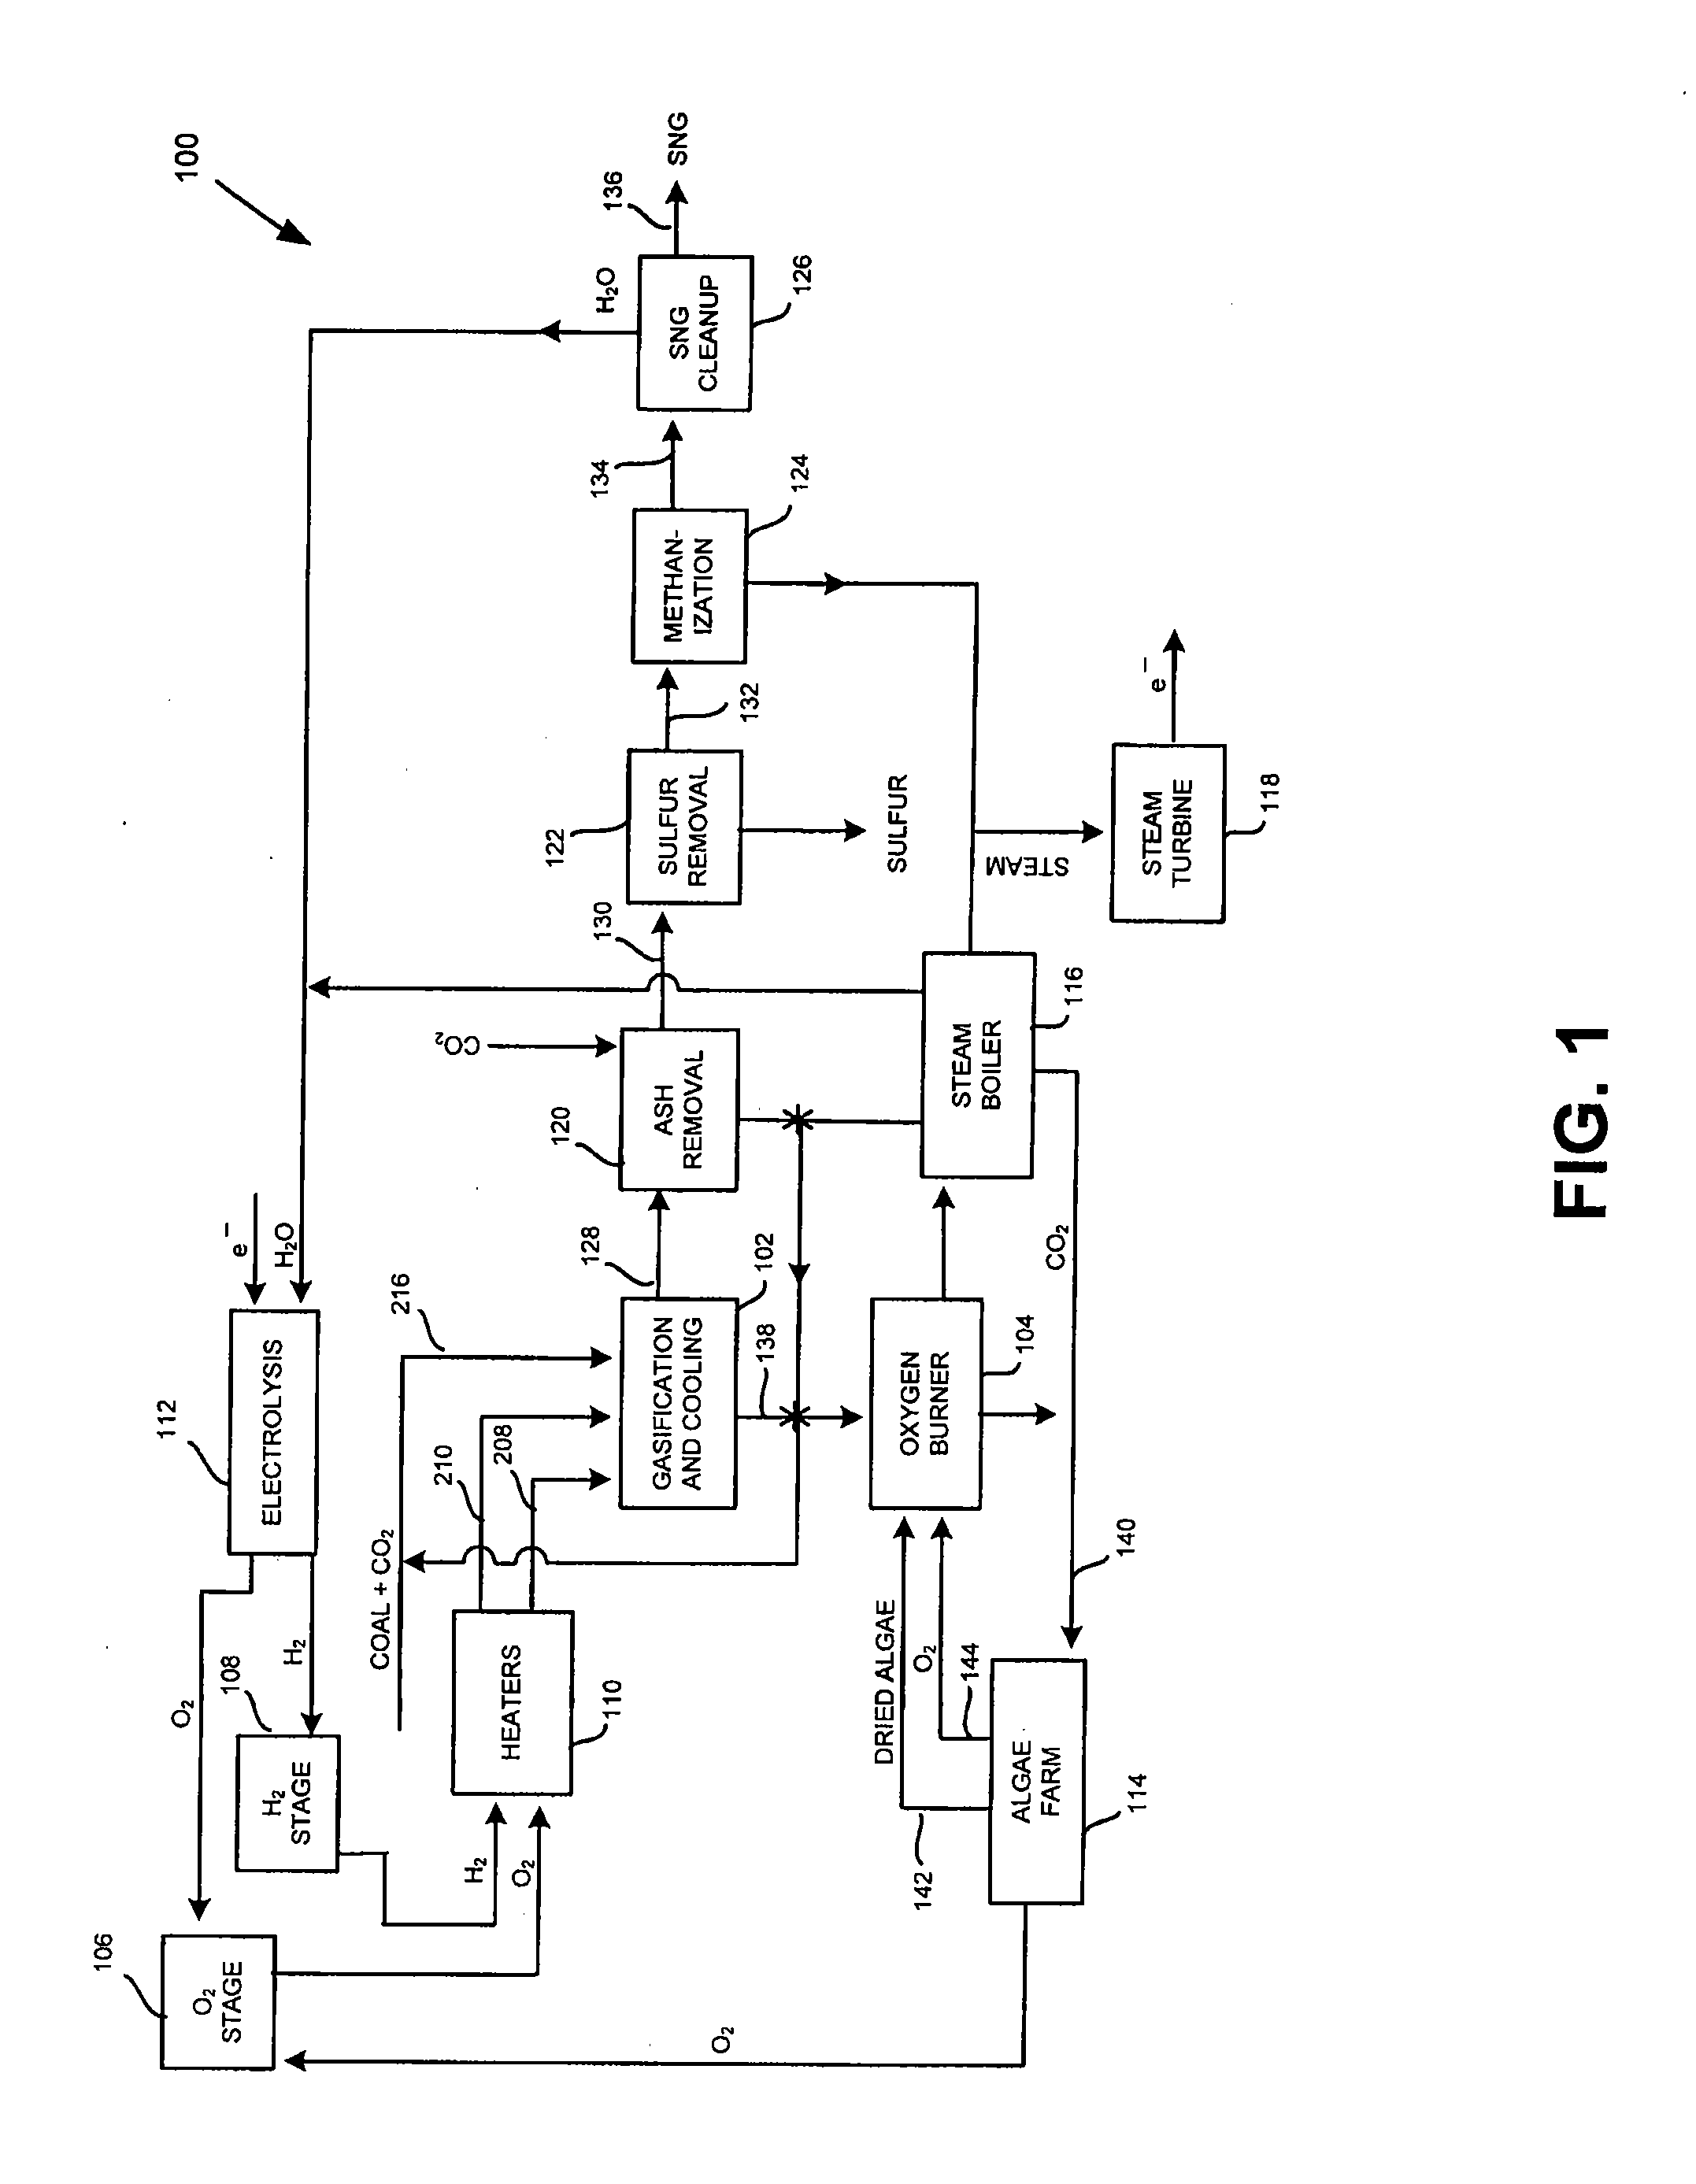 System and method for producing substittue natural gas from coal